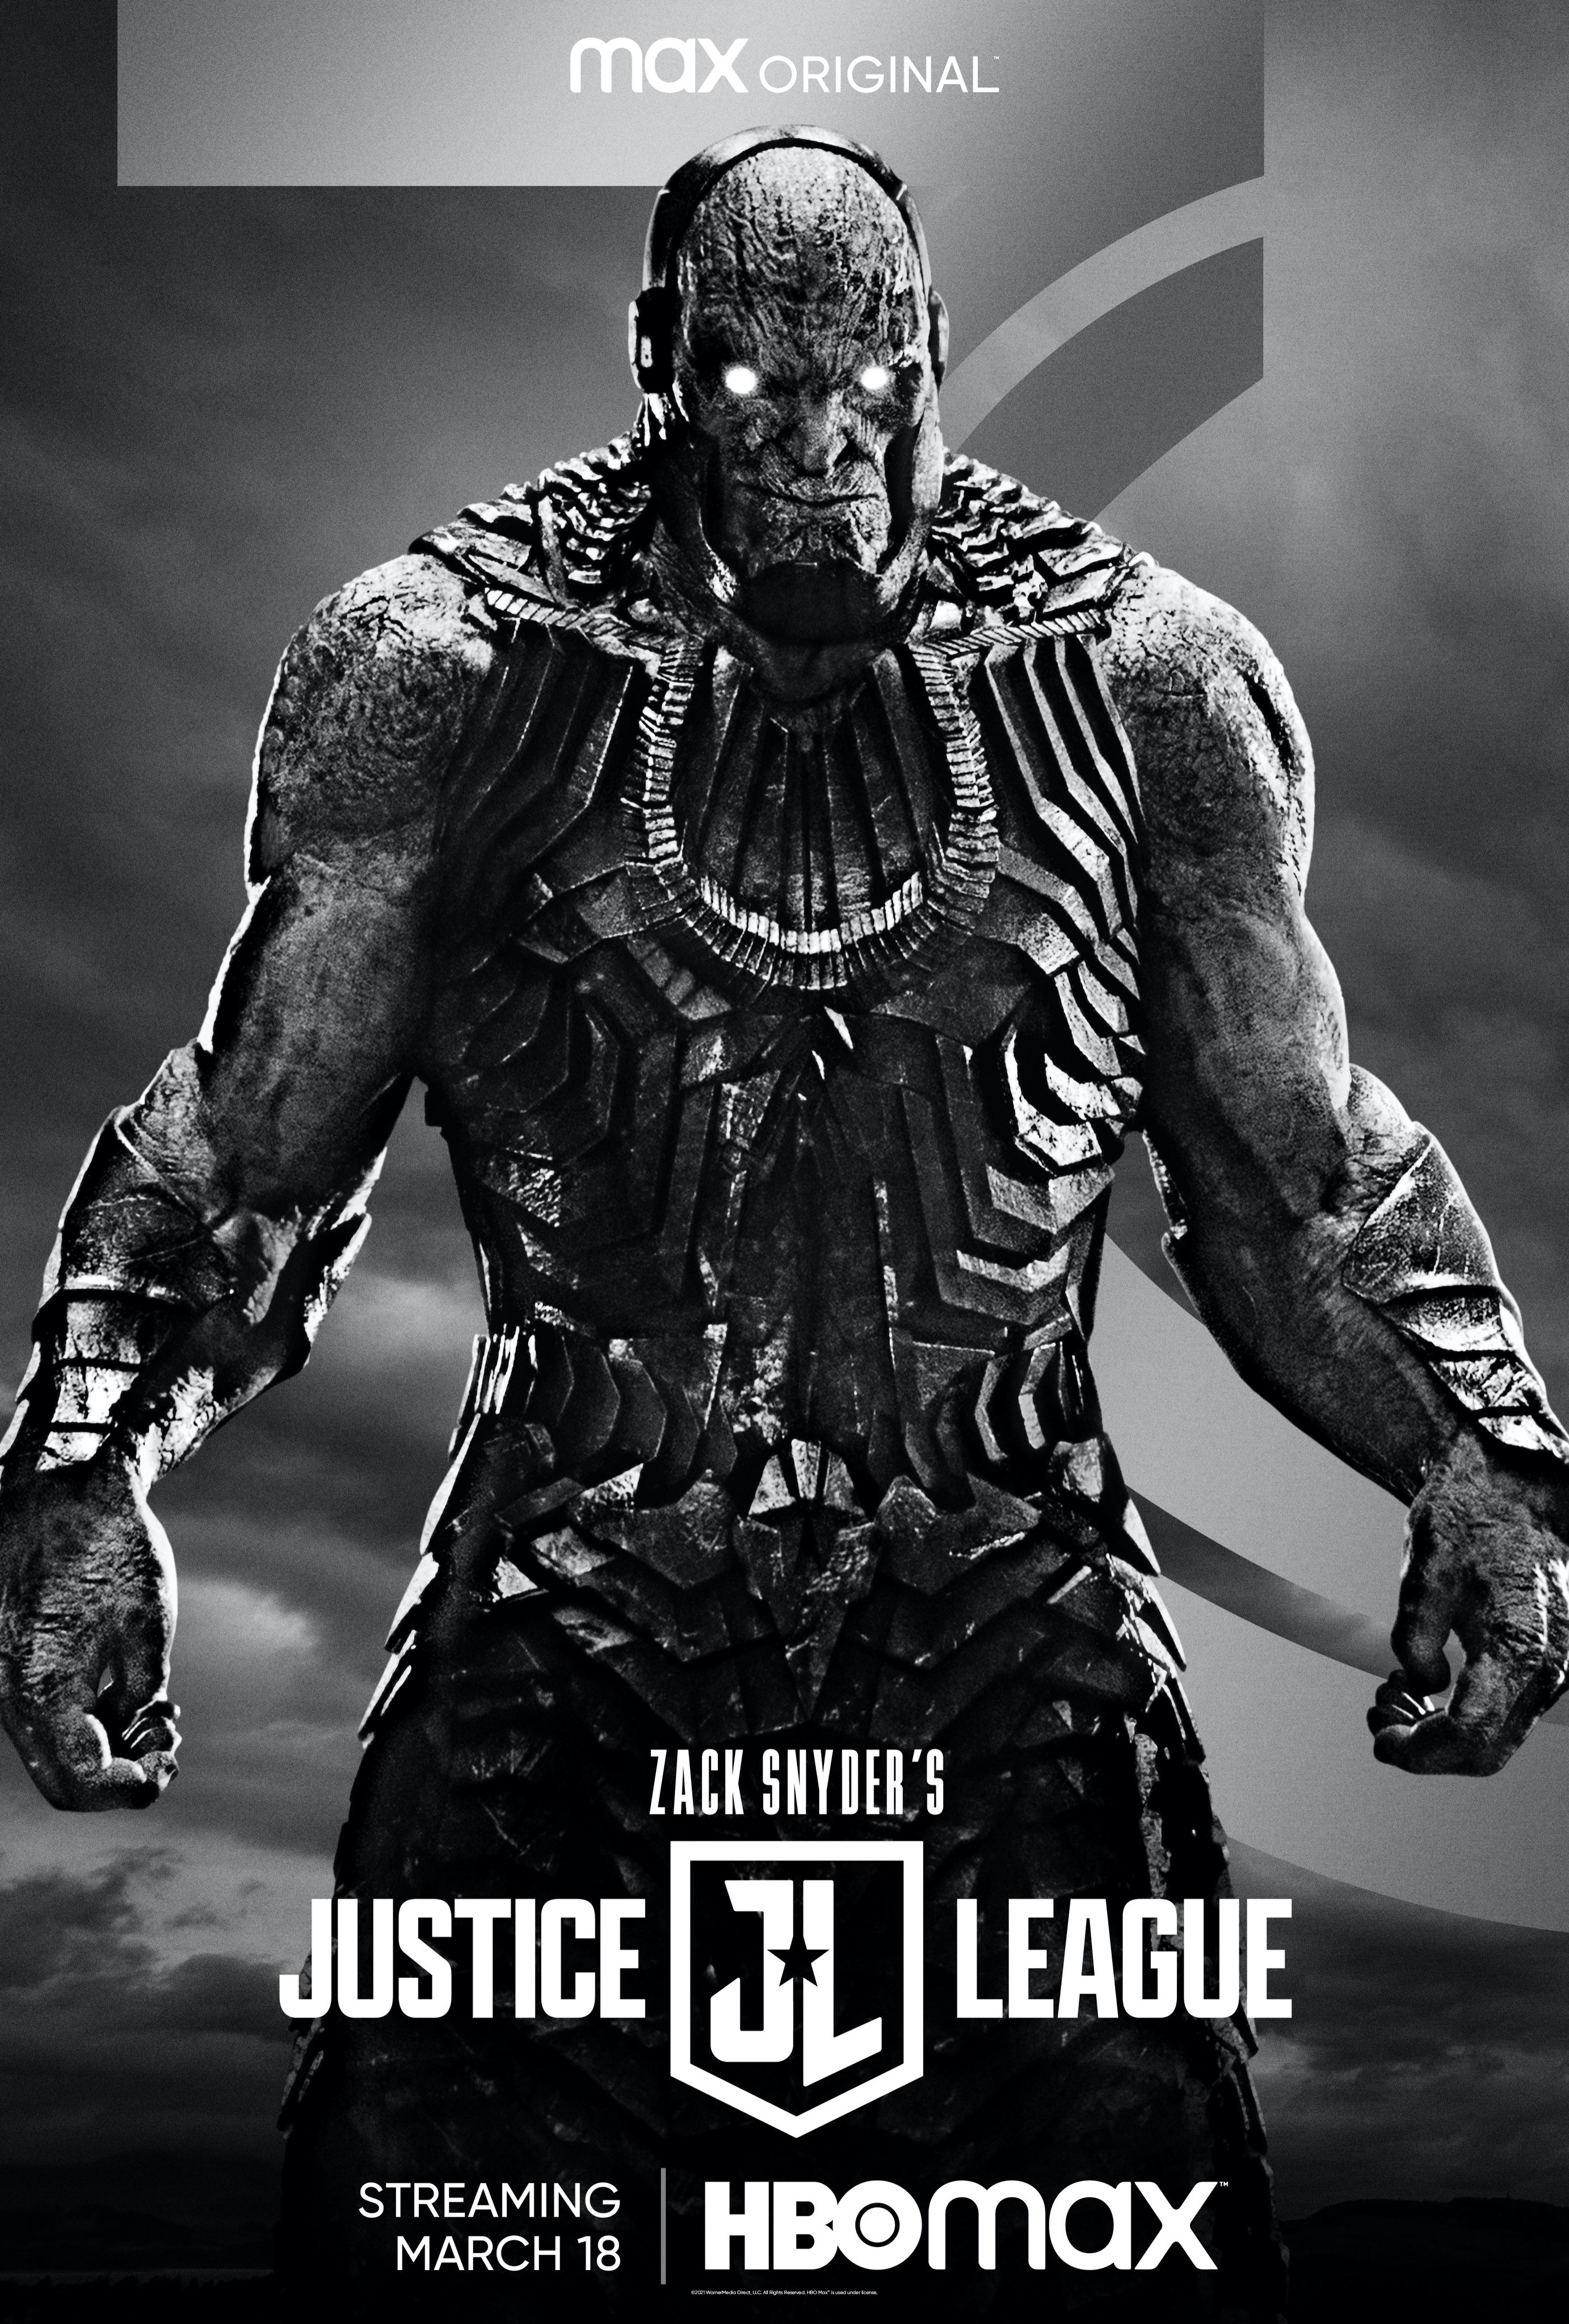 Zack Snyder's Justice League - Character Poster - Darkseid